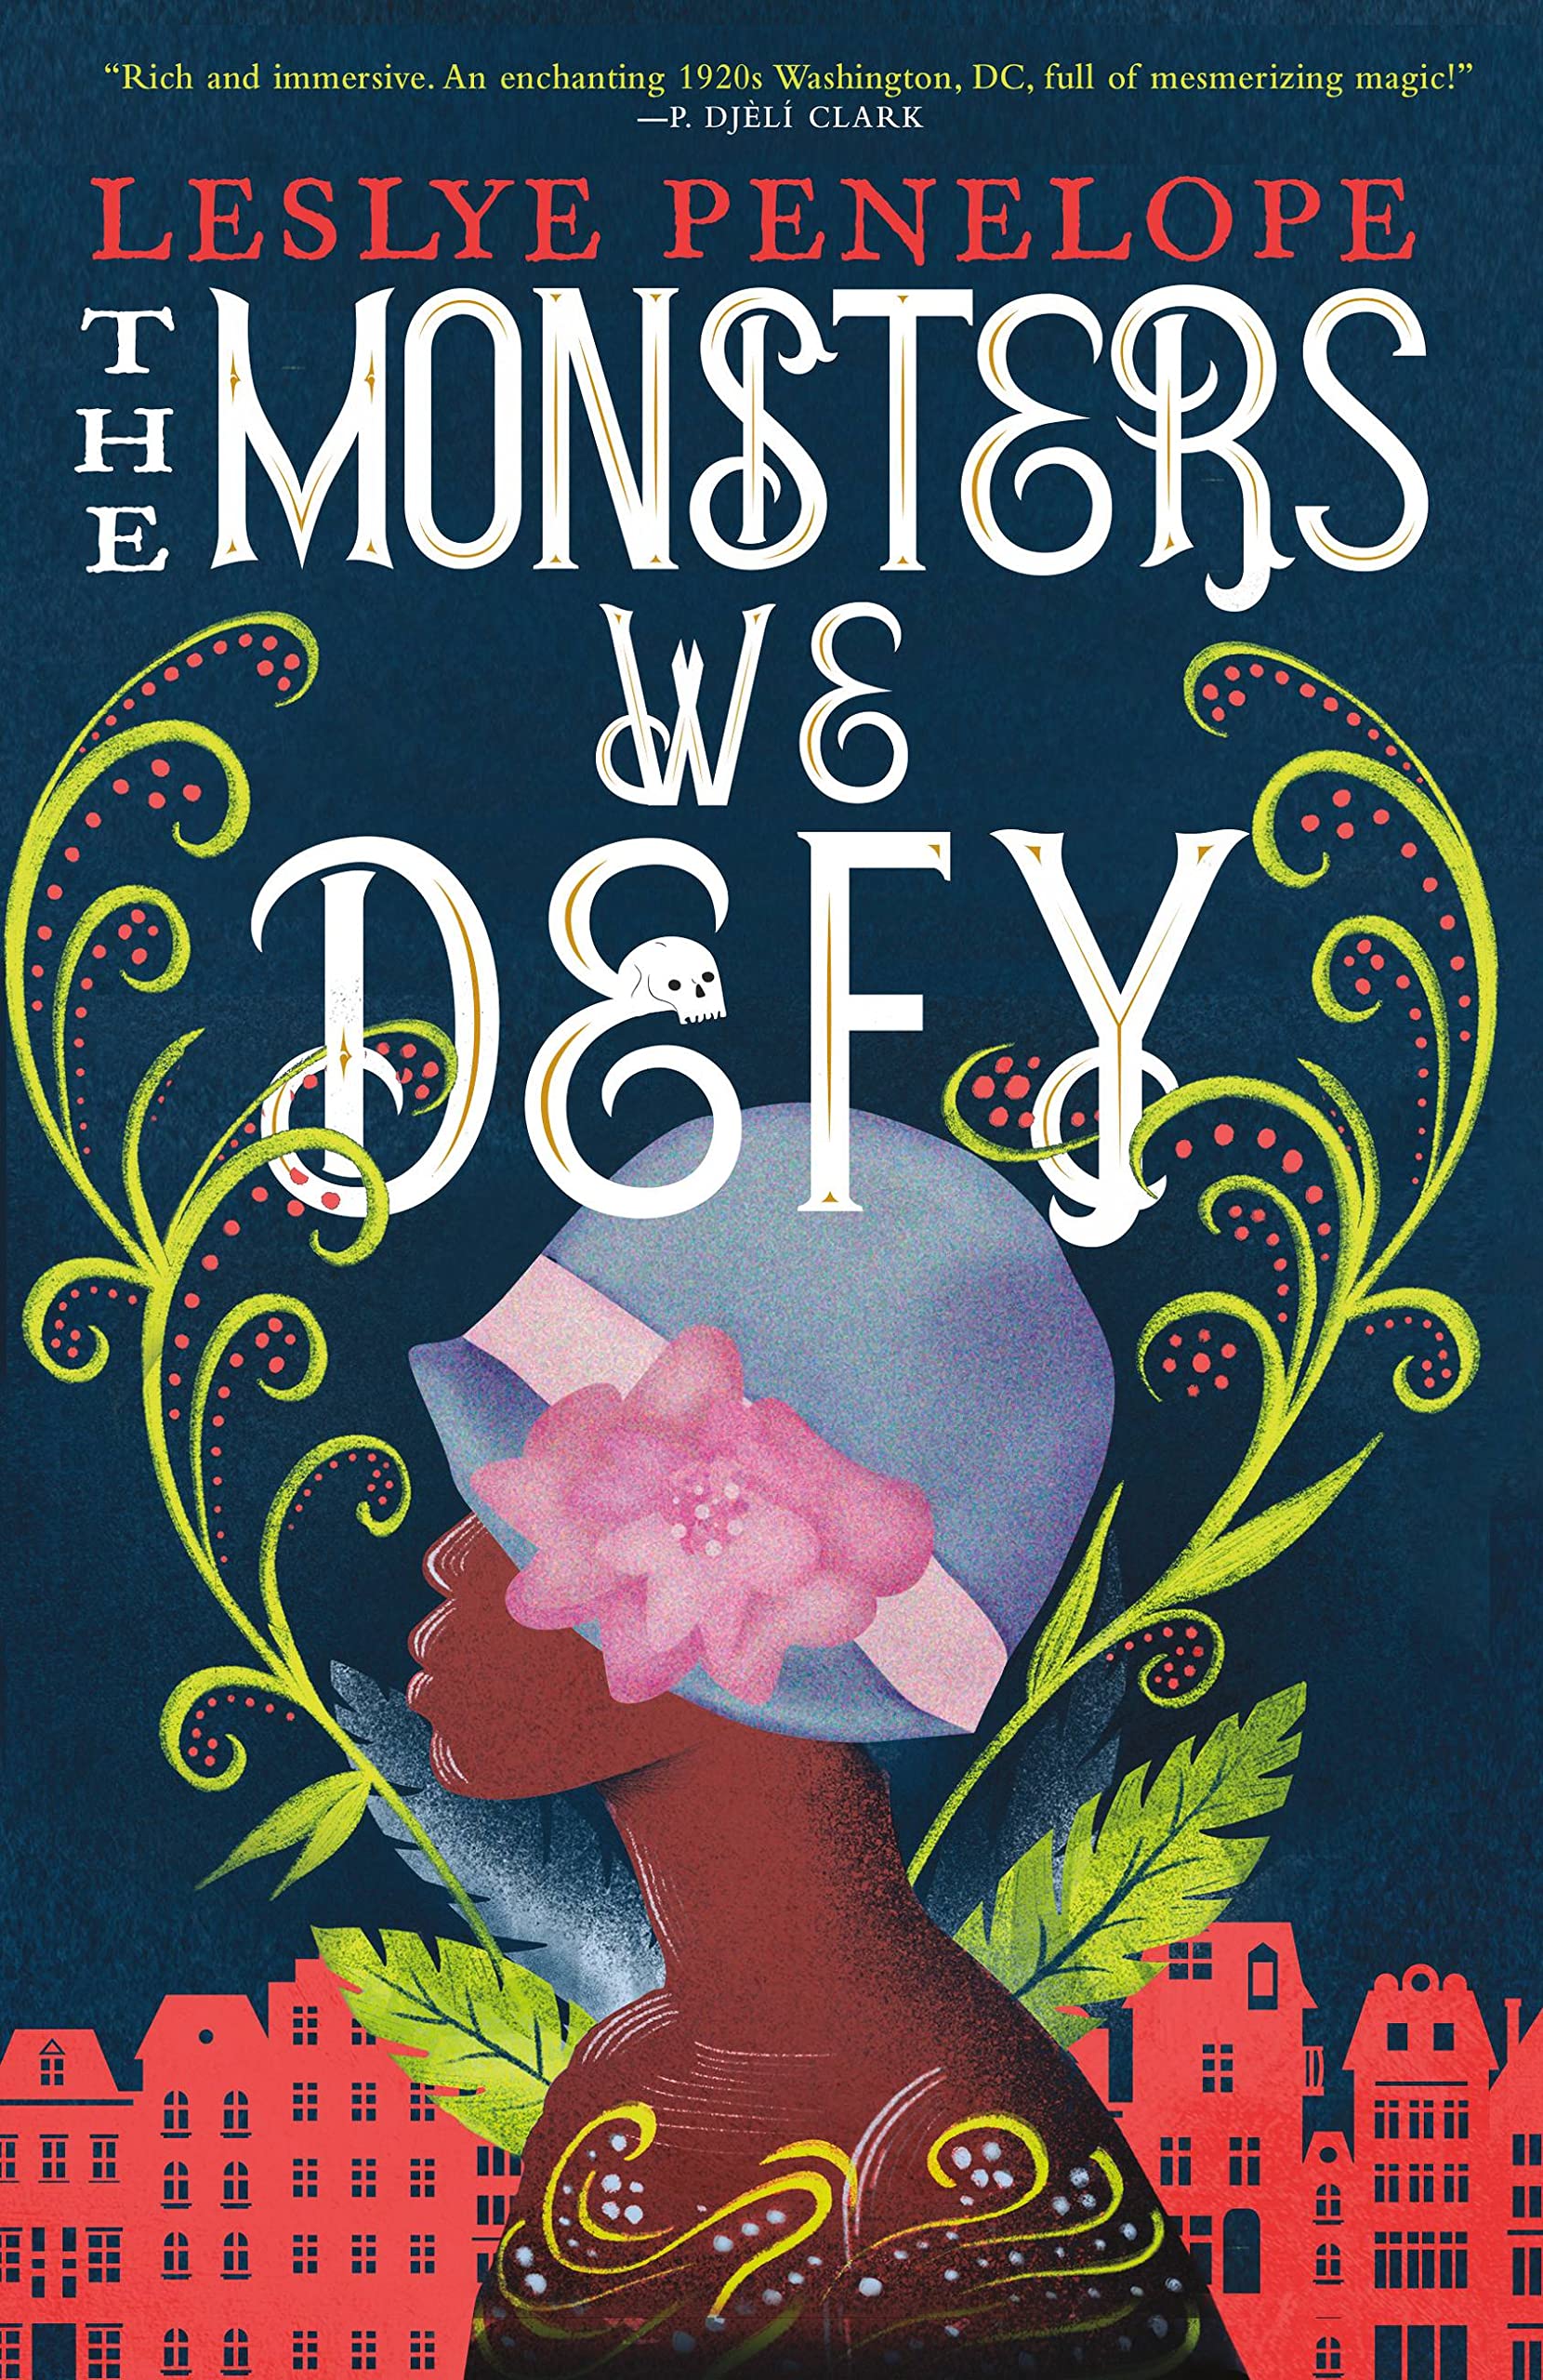 The book cover for The Monsters We Defy by Leslye Penelope